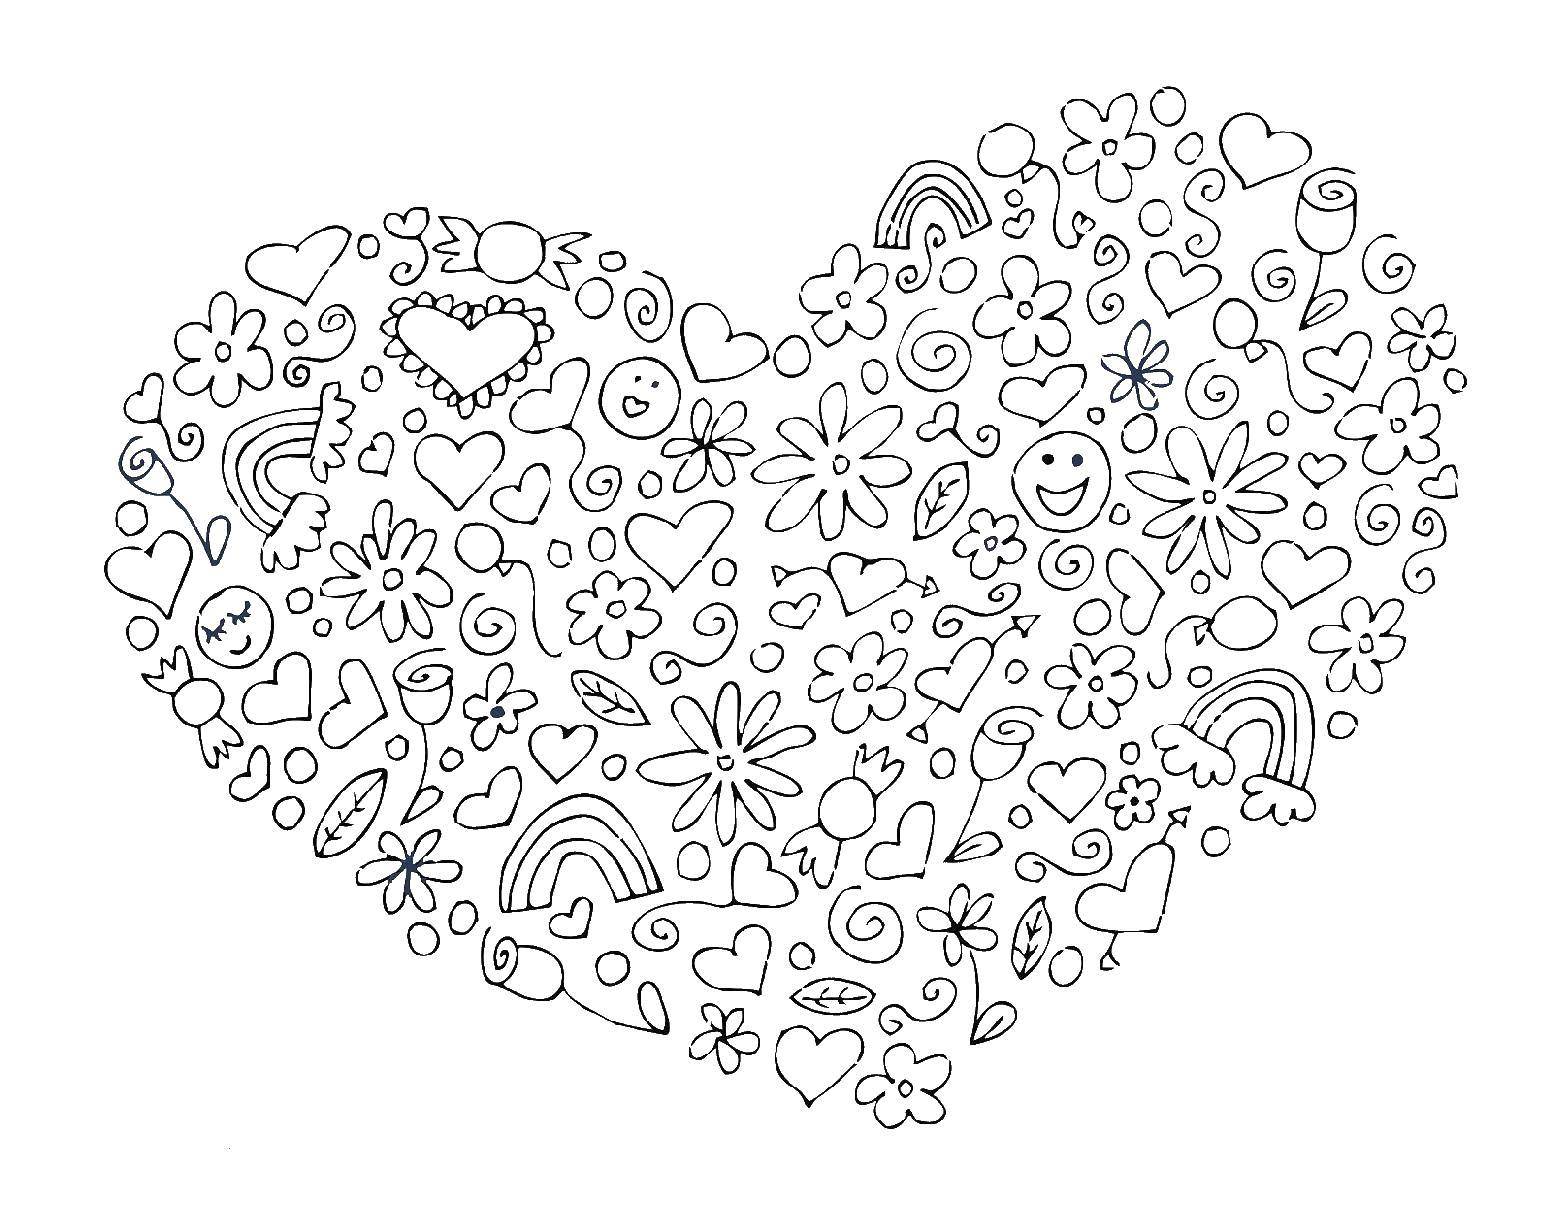 Coloring Cute pattern. Category coloring pages for teenagers. Tags:  Patterns, hearts.